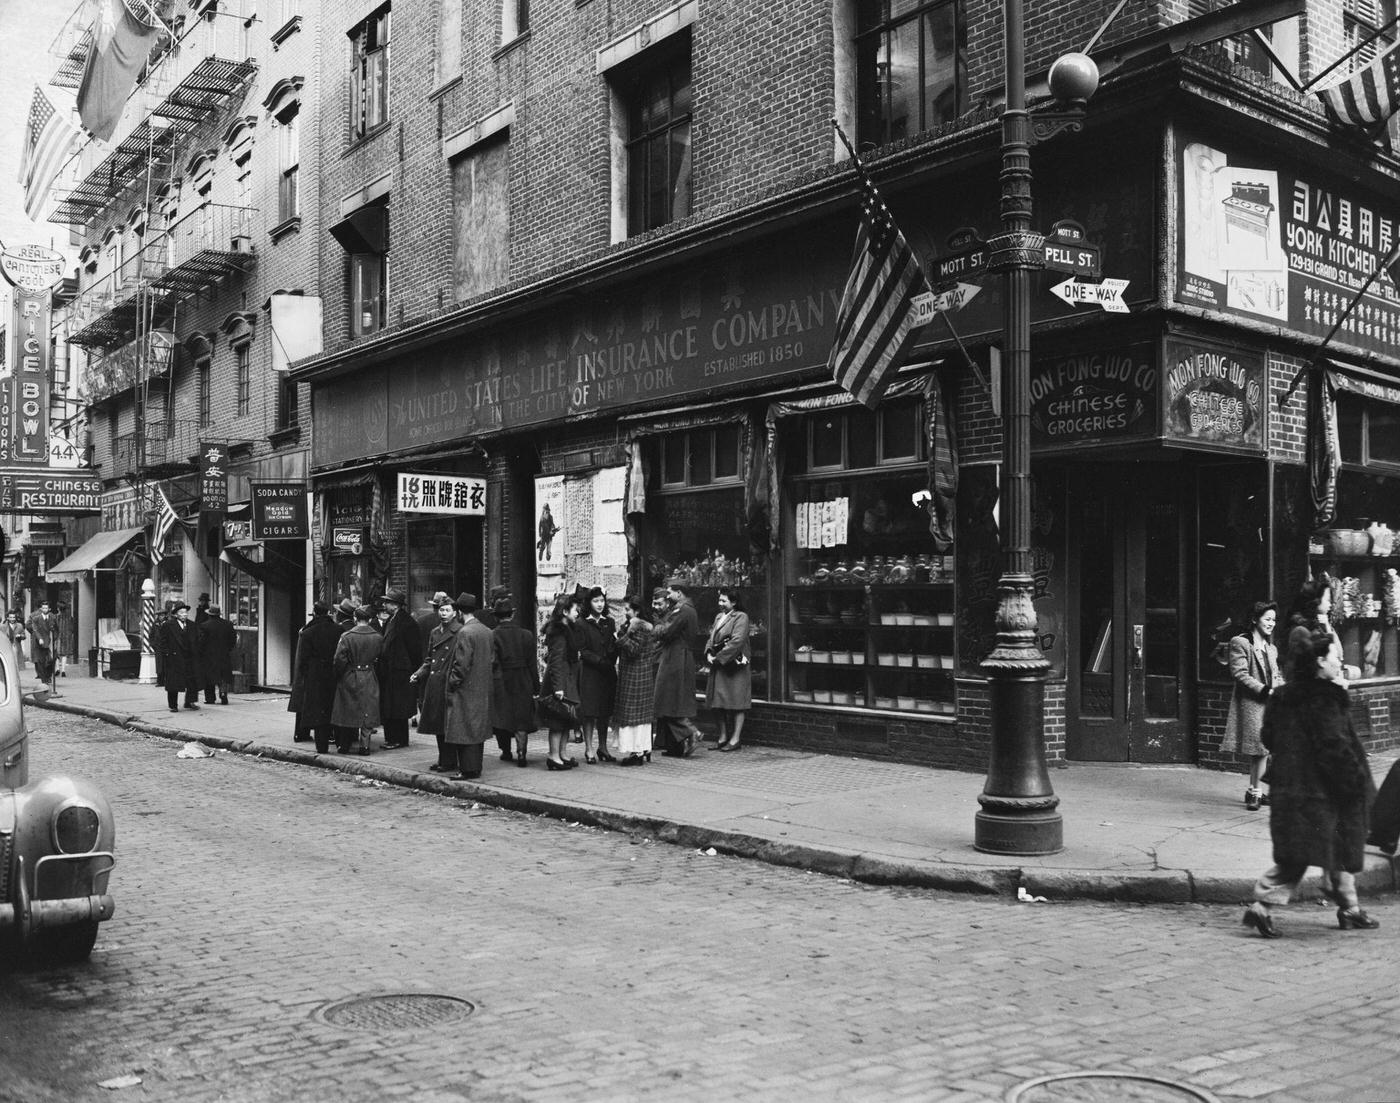 United States Life Insurance Company On The Corner Of Mott Street And Pell Street In Chinatown, Manhattan, 1940.